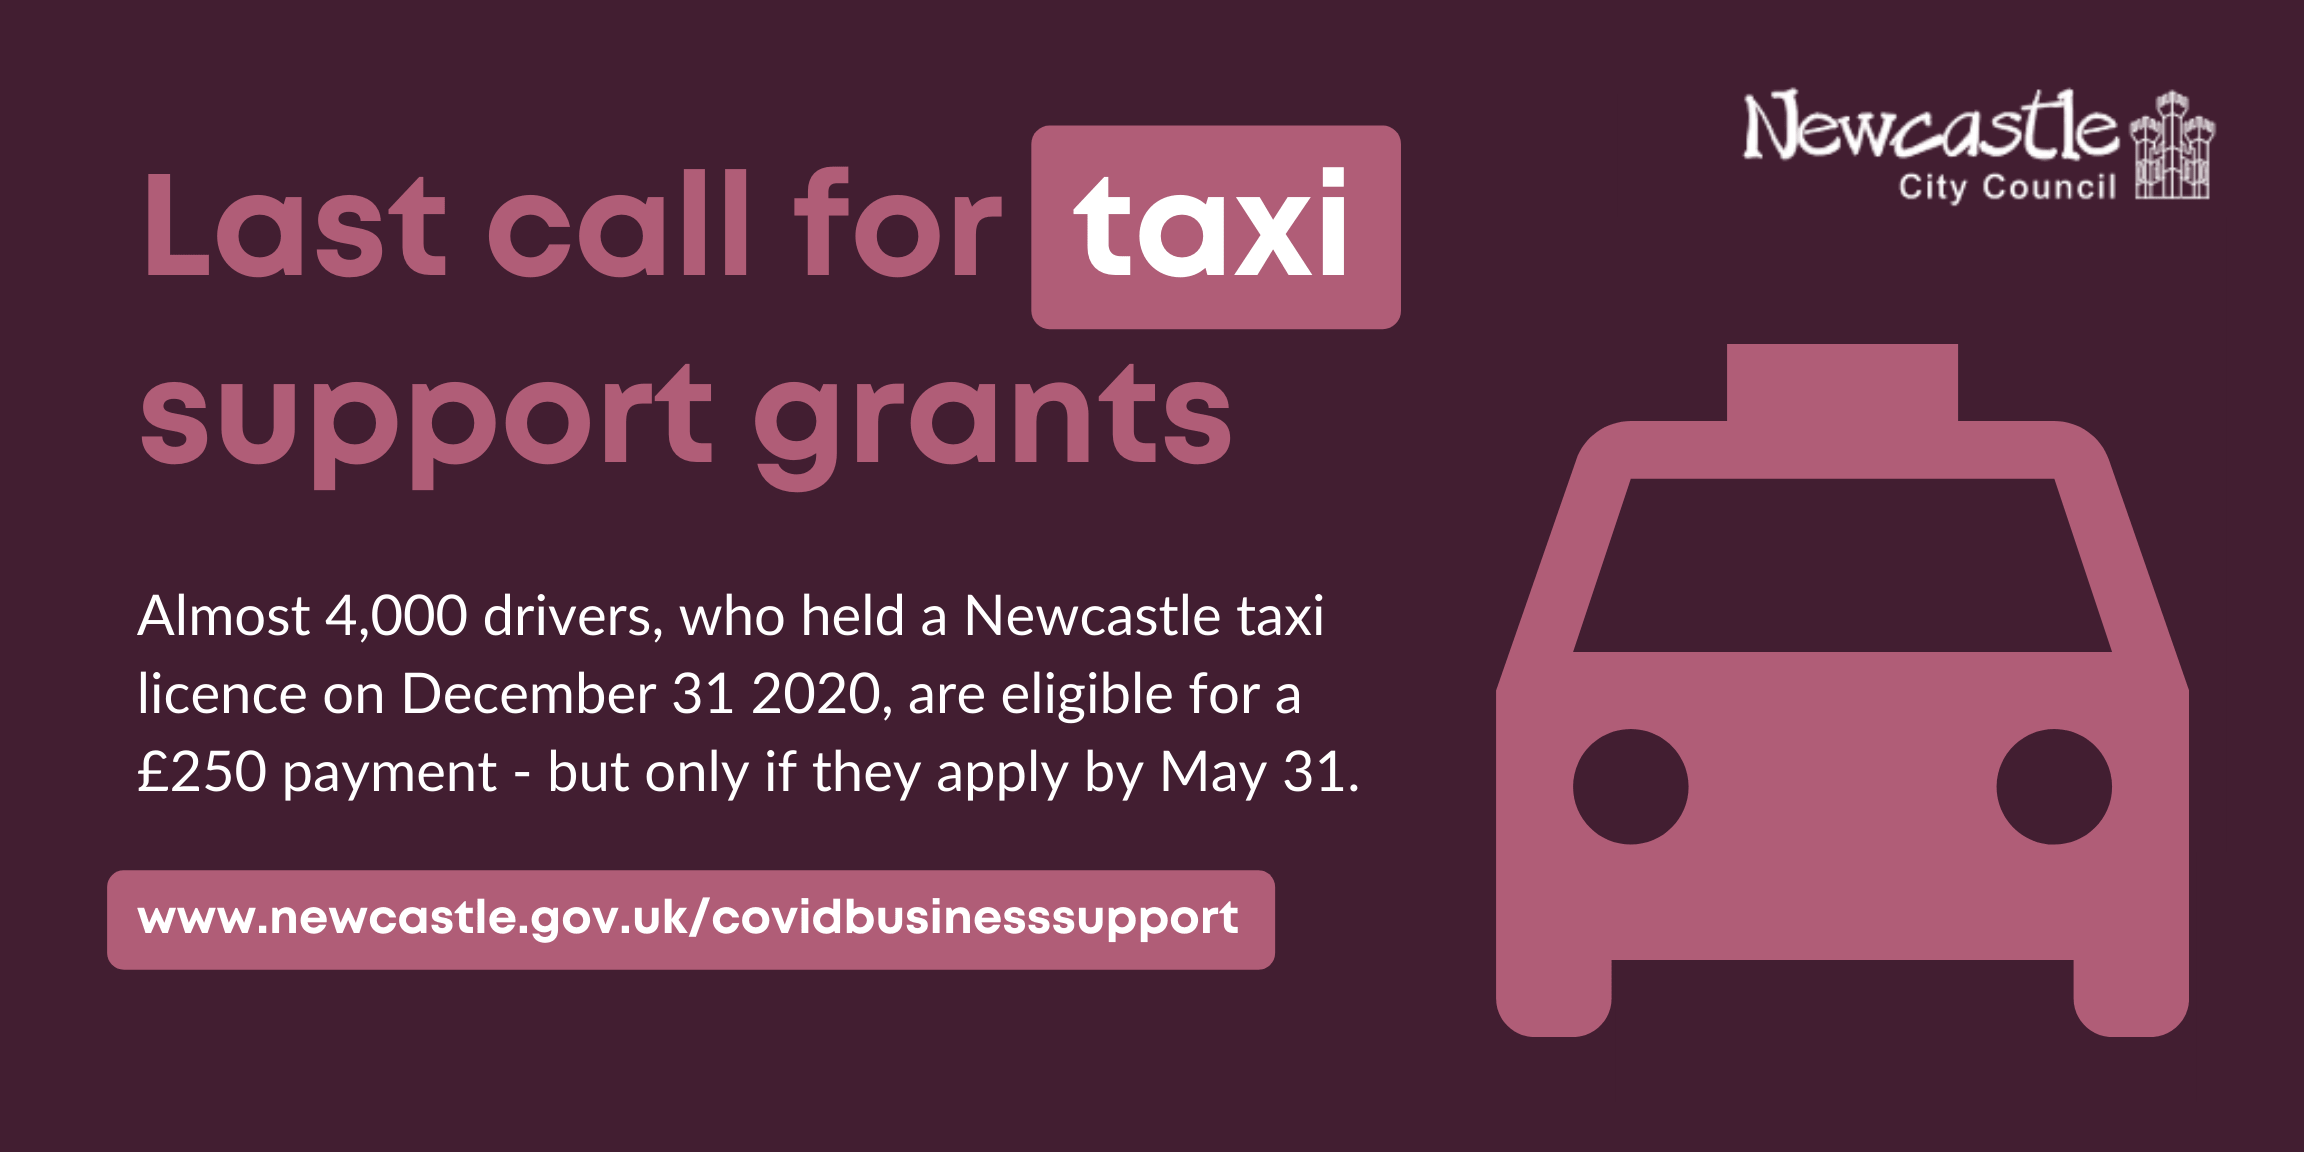 A third of taxi drivers need to claim the grant before the deadline of 31 May.